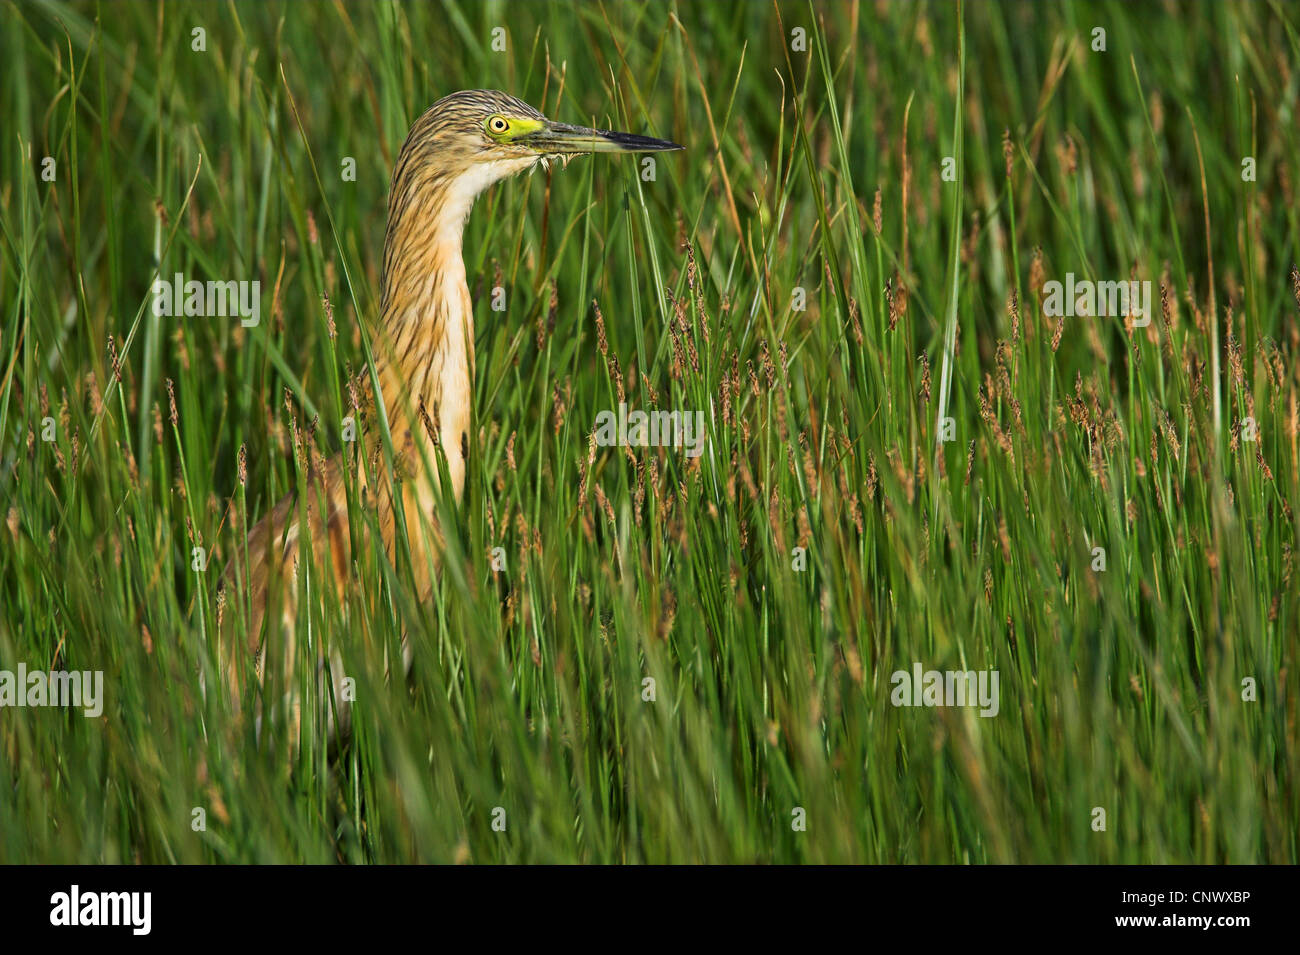 Squacco heron (Ardeola ralloides), standing in a swamp among rushes, Greece, Lesbos, Kalloni Salt Pans Stock Photo